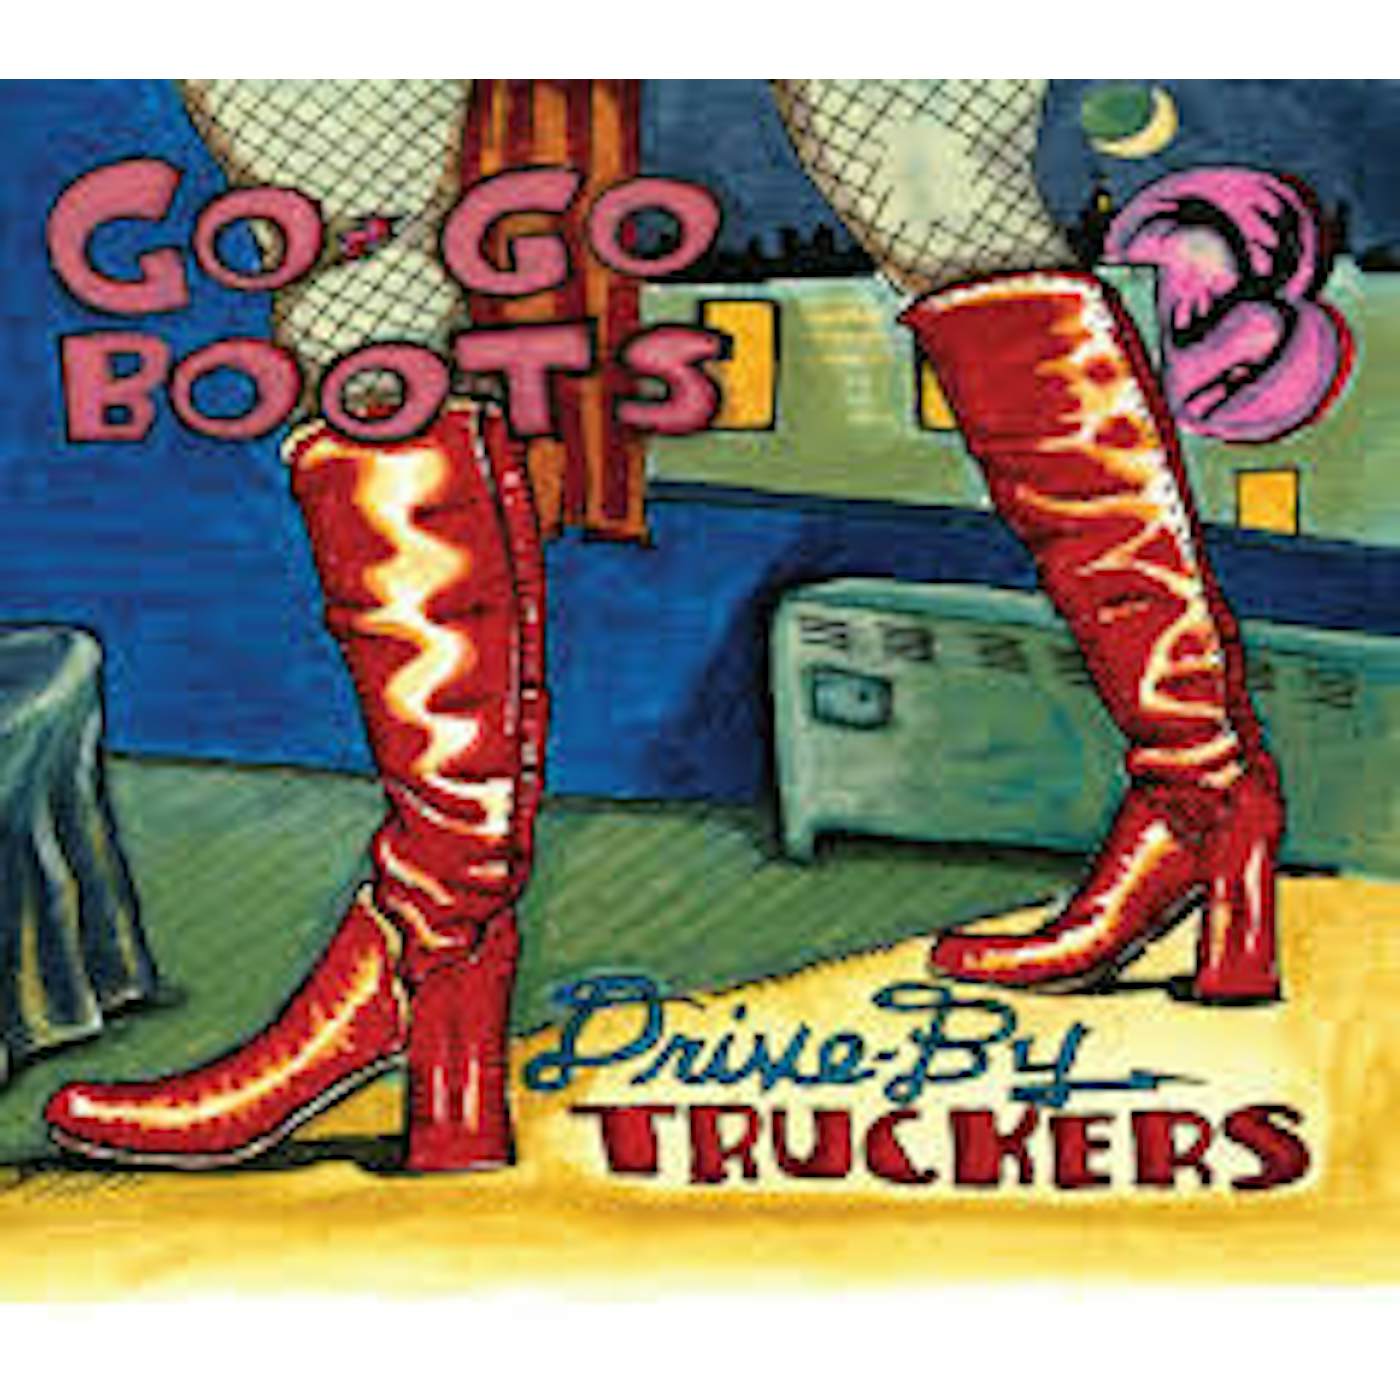 Drive-By Truckers Go-Go Boots Vinyl Record